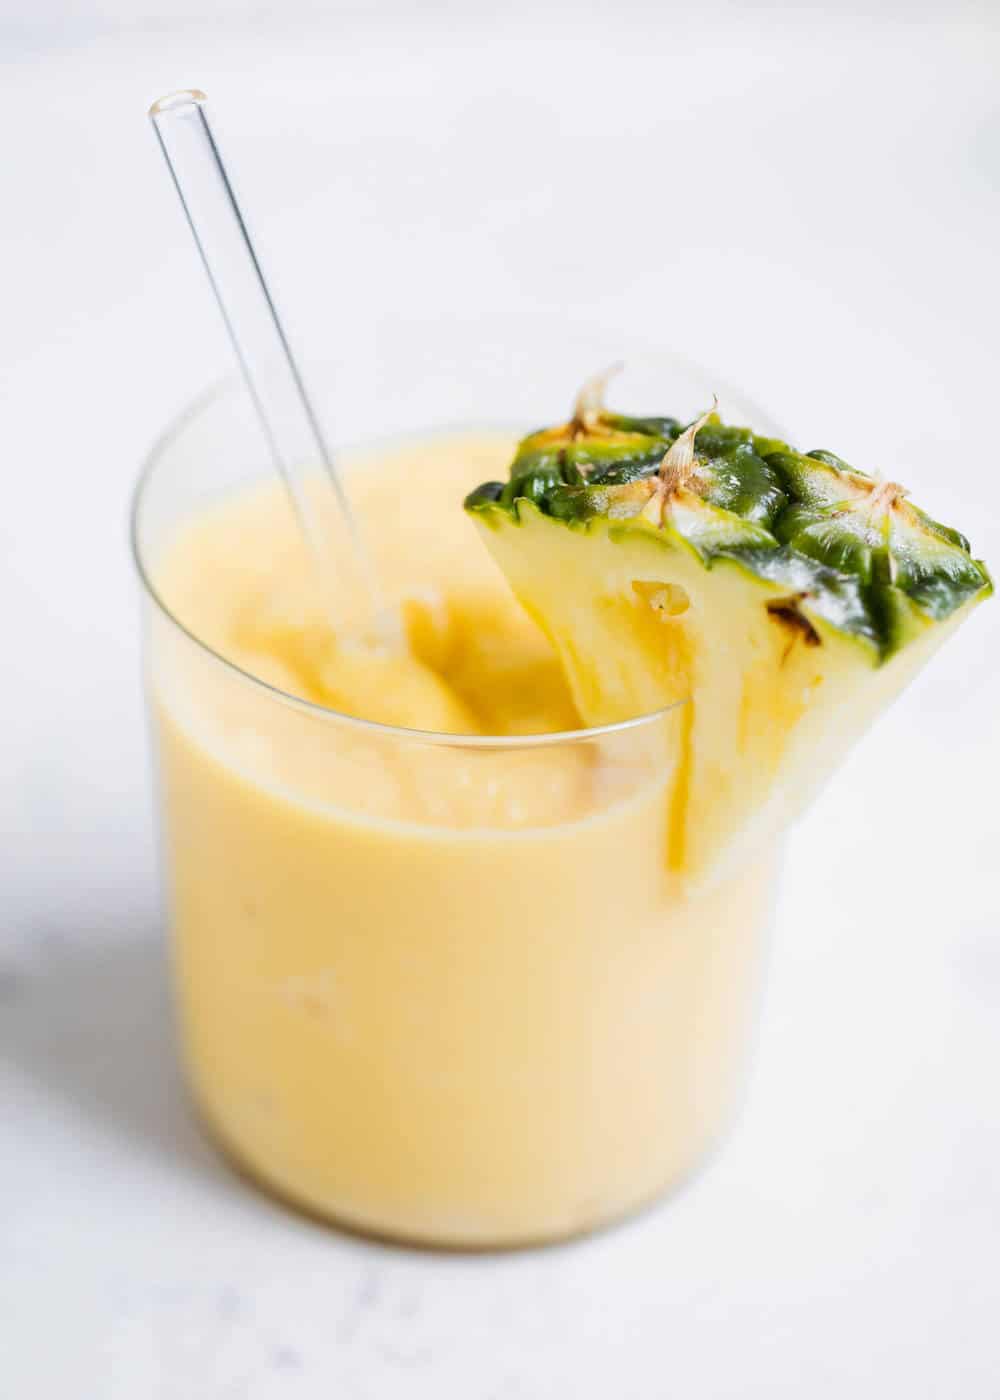 Pineapple smoothie in glass cup with straw.